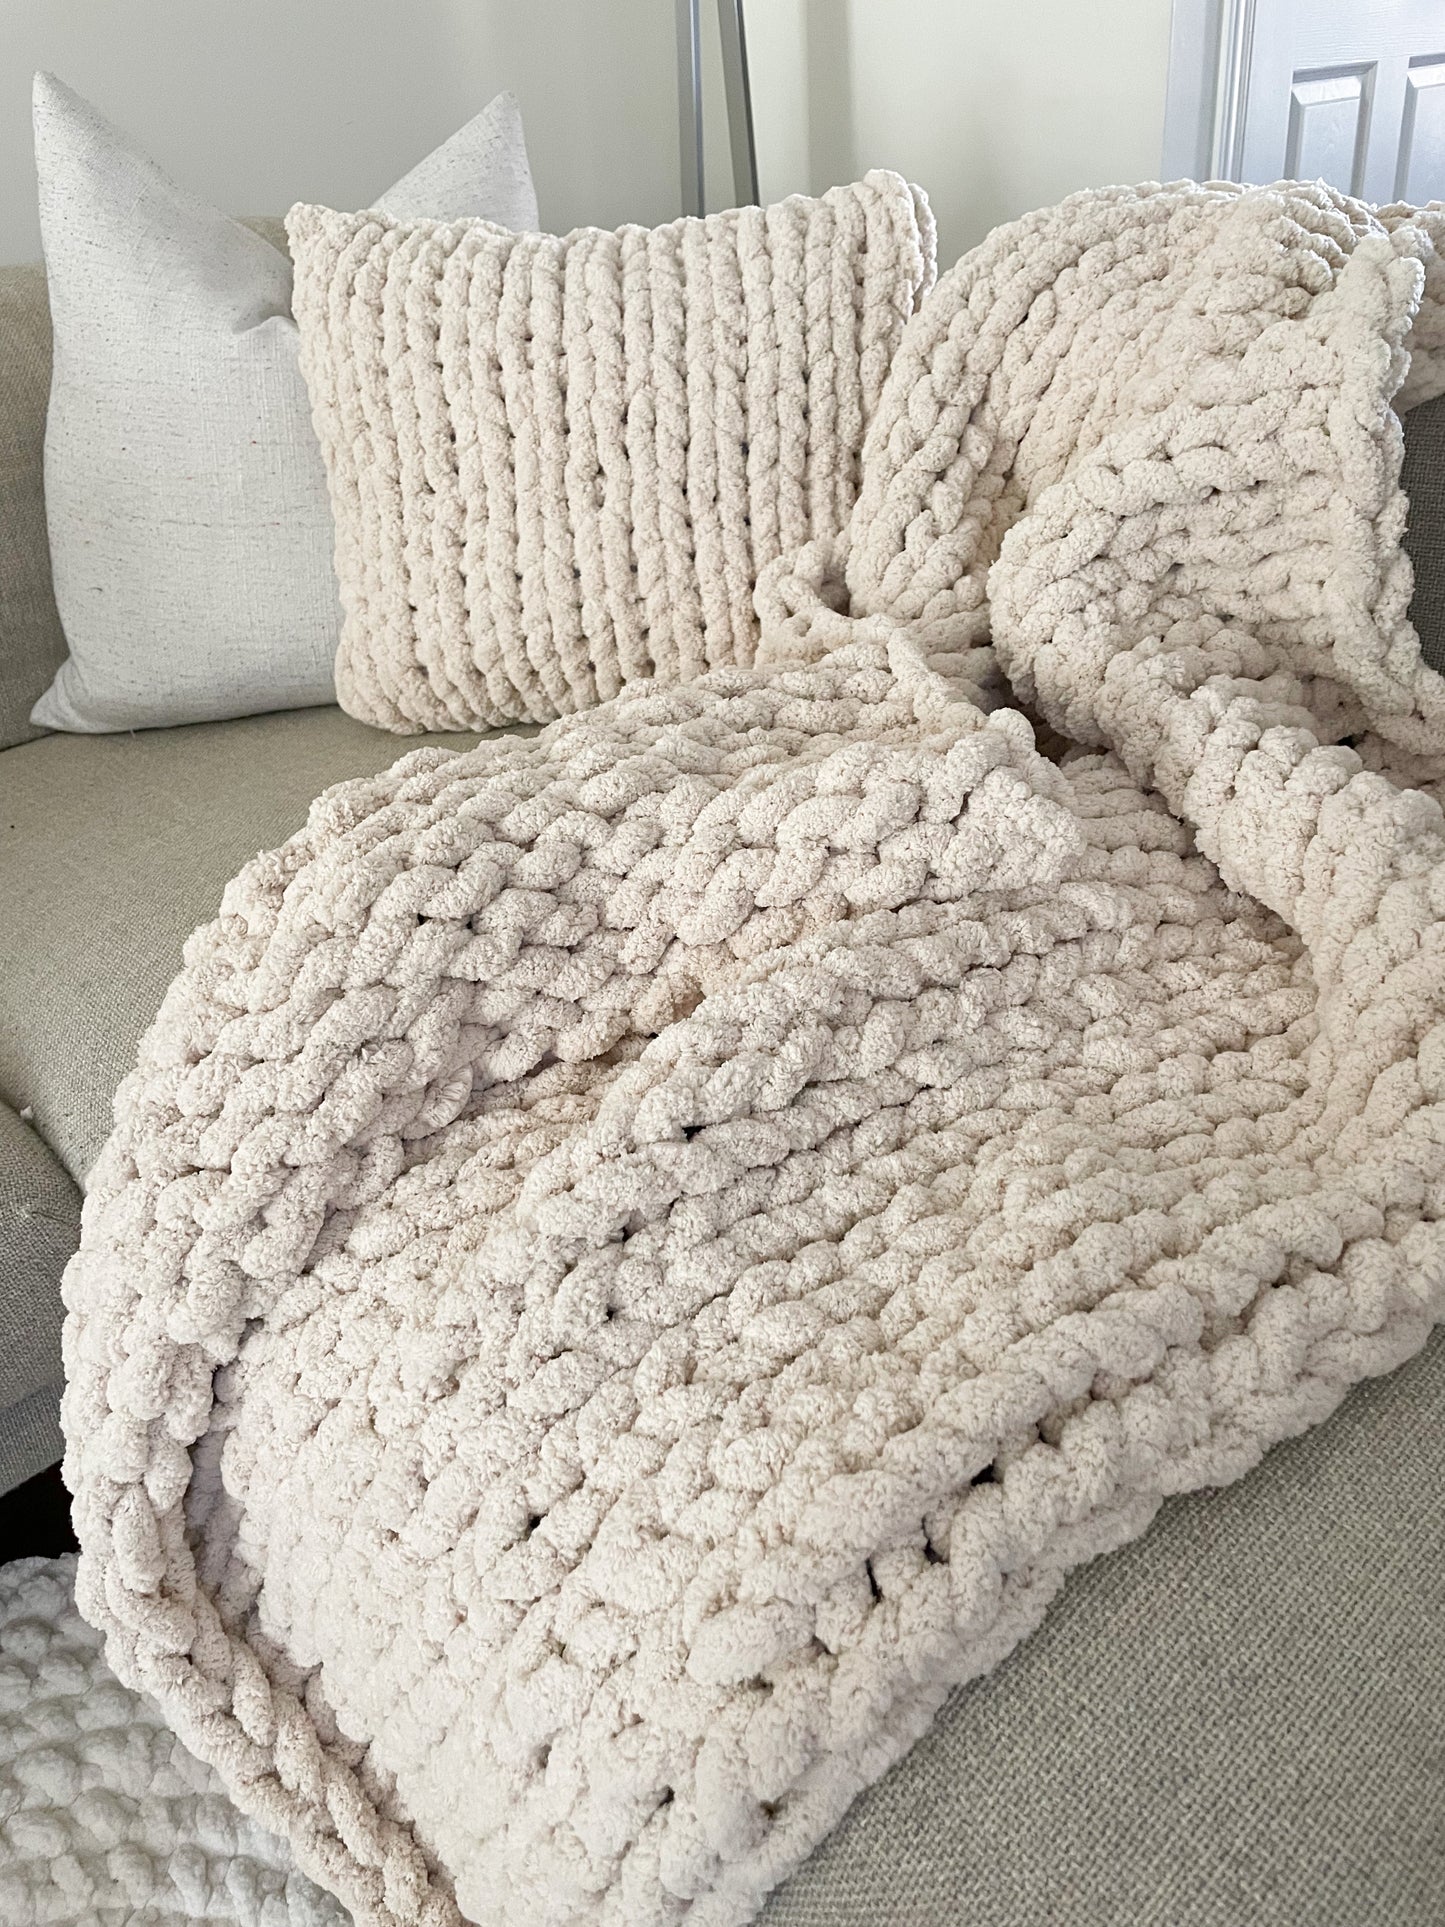 Chunky Yarn Pillow and Blanket Set in Oatmeal